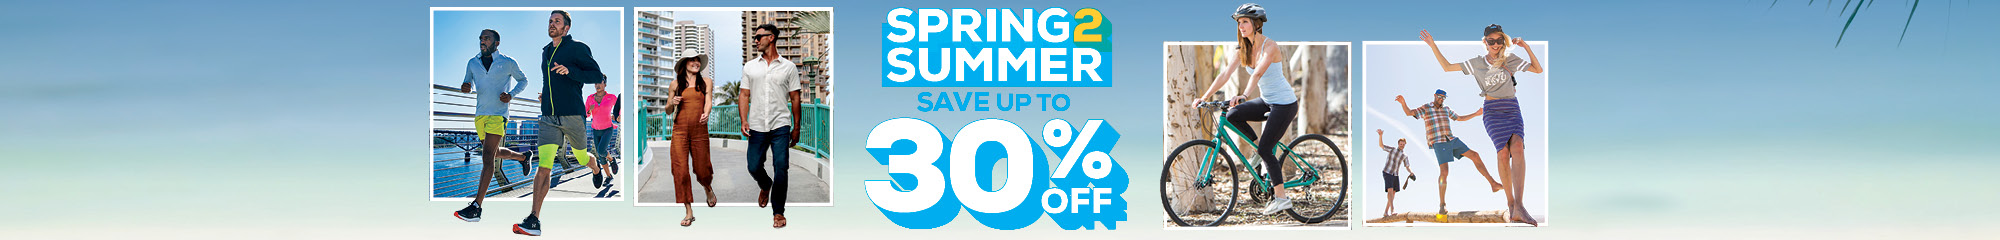 Spring to Summer Sale. Save up to 30% off.